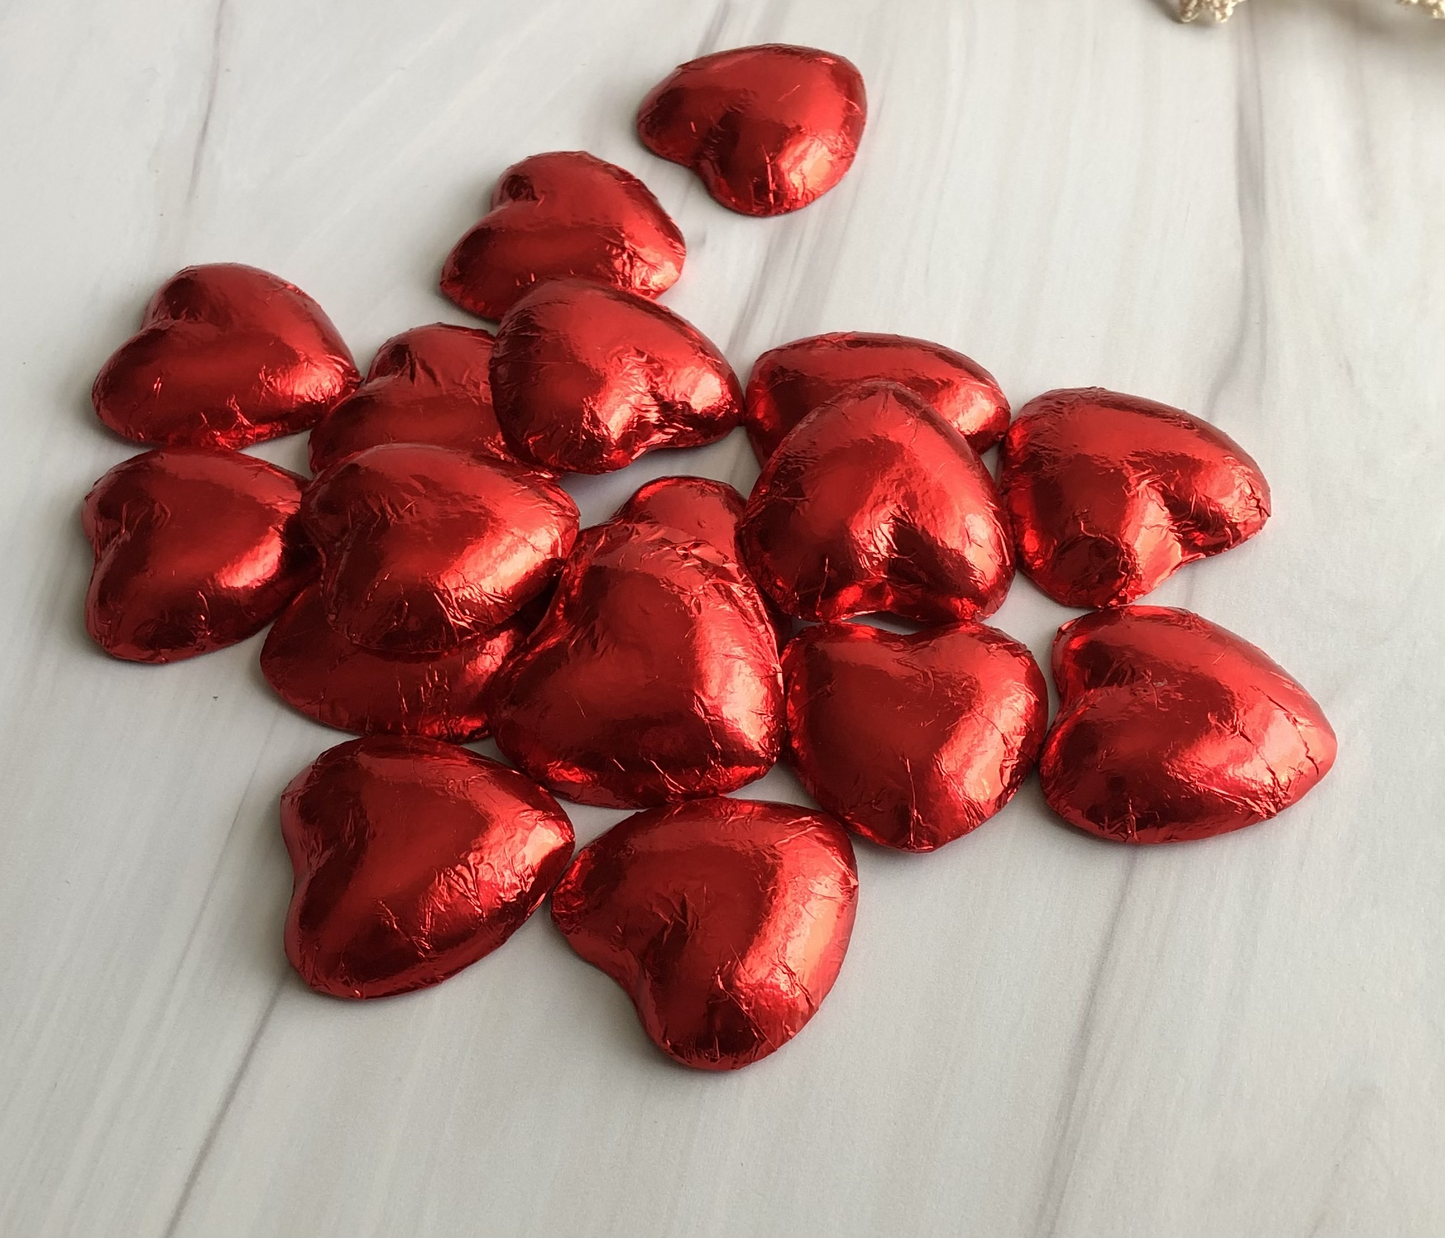 Mona's Chocolate Foiled Hearts Wedding Party Favors 1 LB Valentines Gift